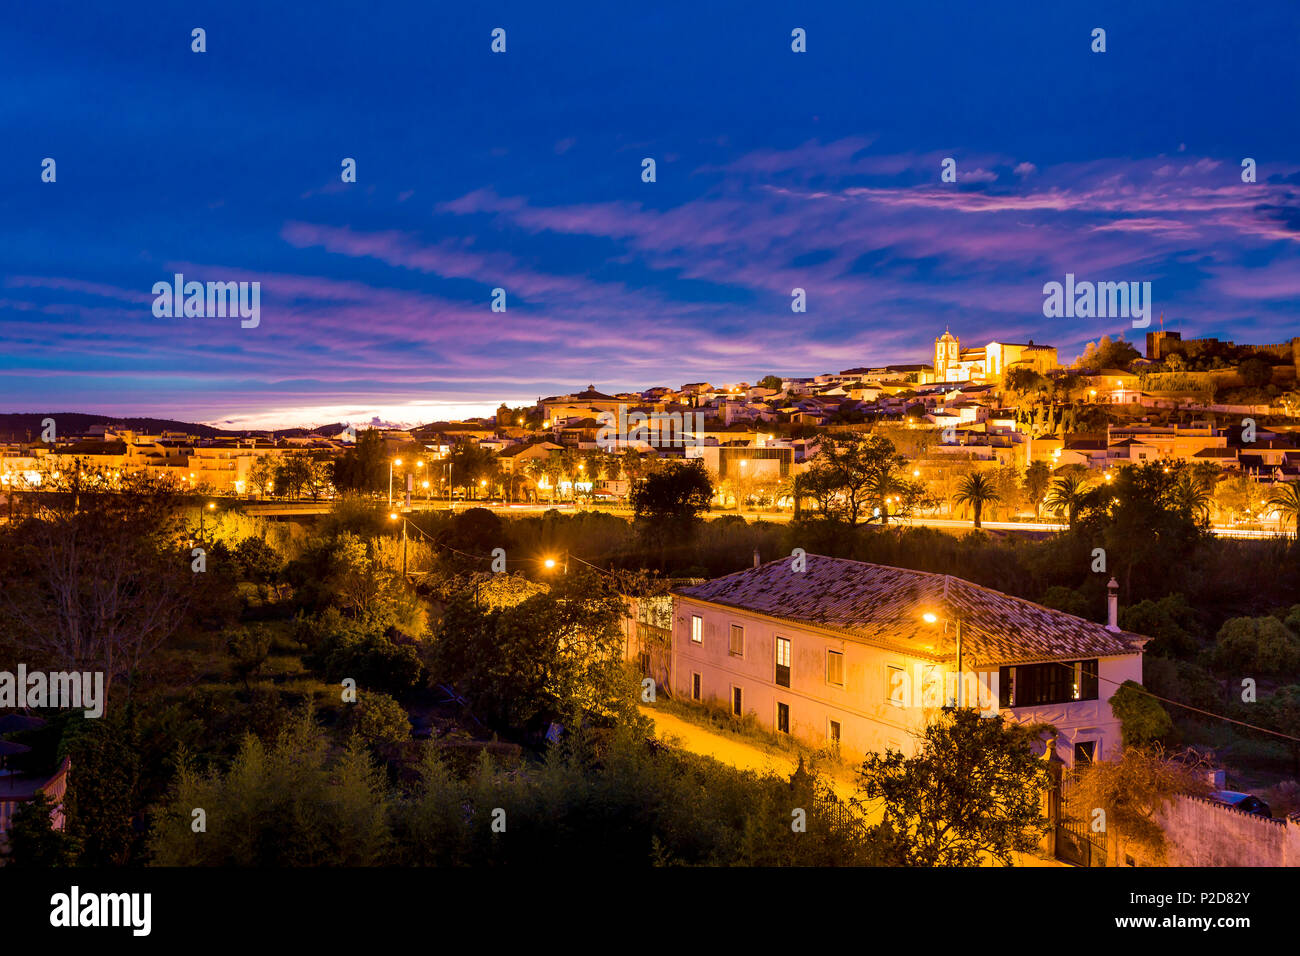 View towards old town, castle and cathedral at twilight, Silves, Algarve, Portugal Stock Photo